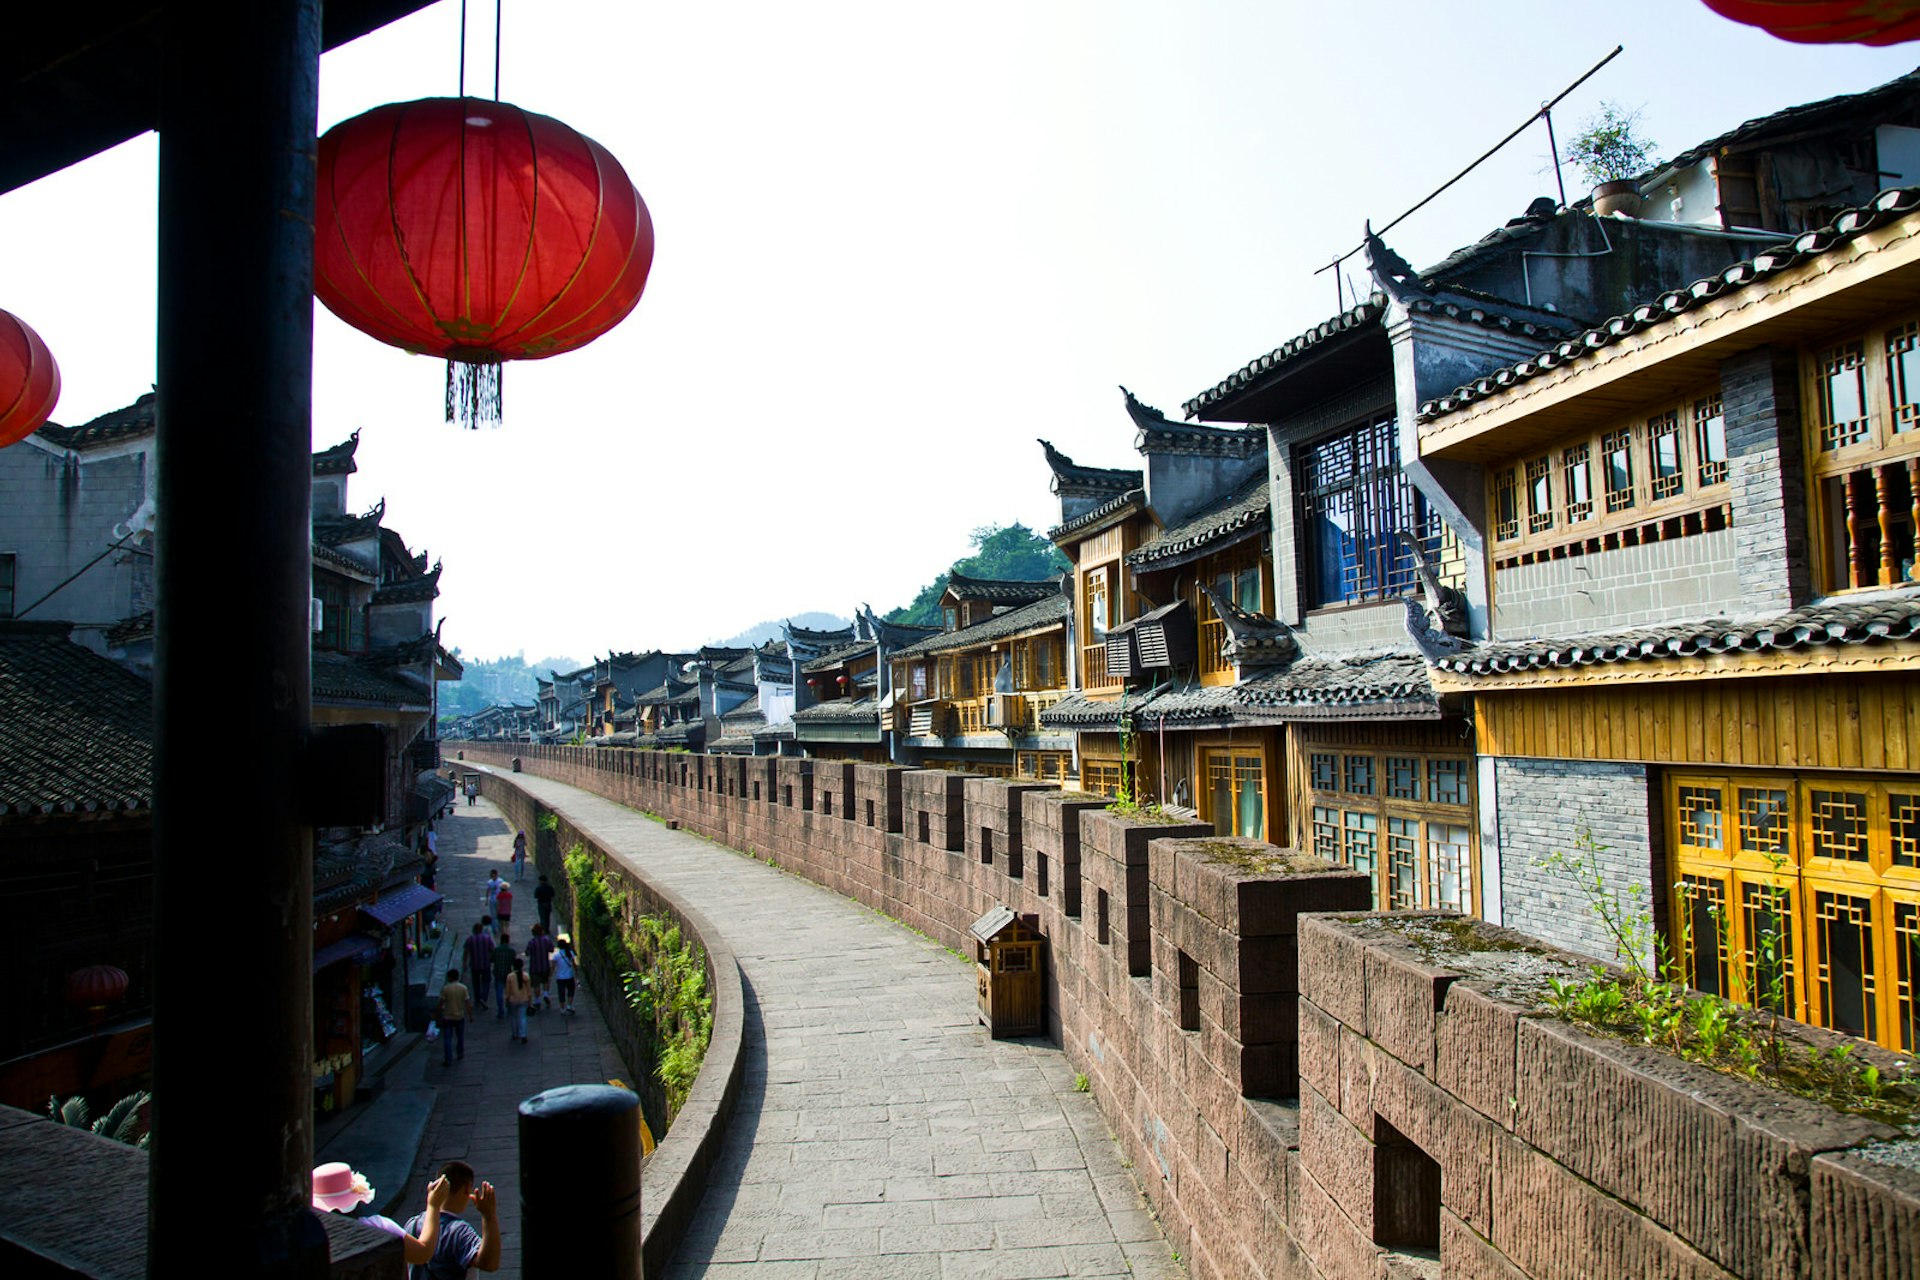 Fenghuang's restored Ming-era wall runs through the city © View Stock / Getty